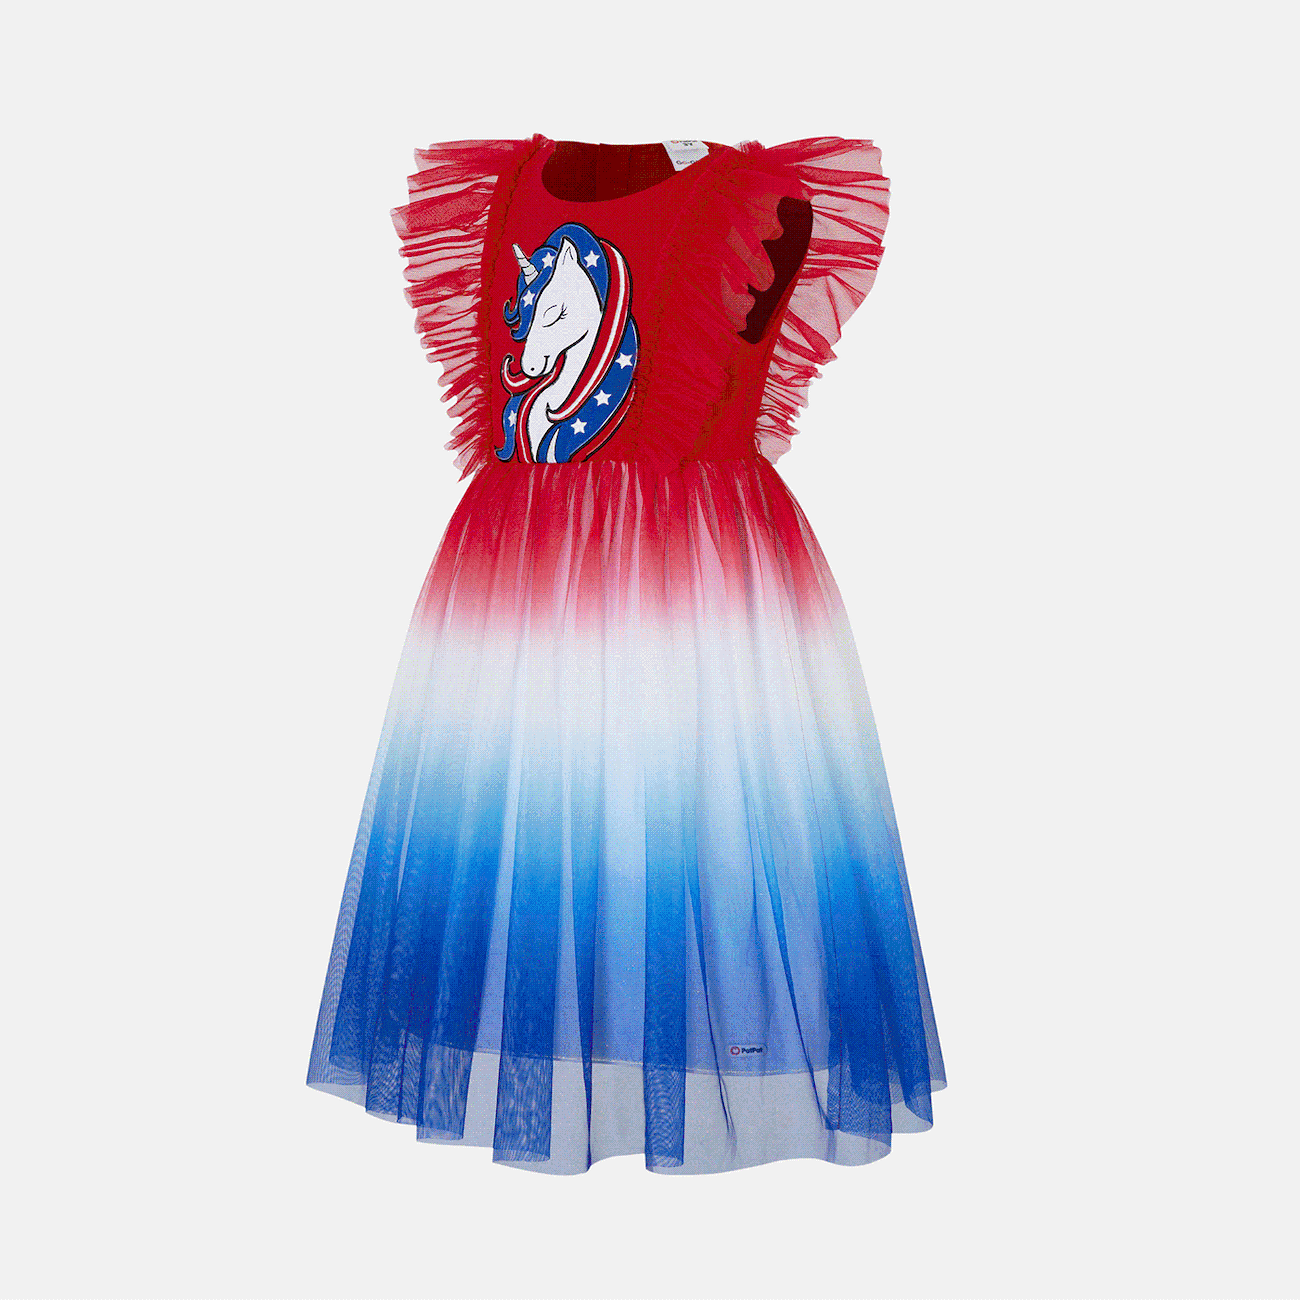 Go-Glow Illuminating Unicorn Red Dress with Light Up Gradient Skirt Including Controller (Battery Inside) Red/White big image 1